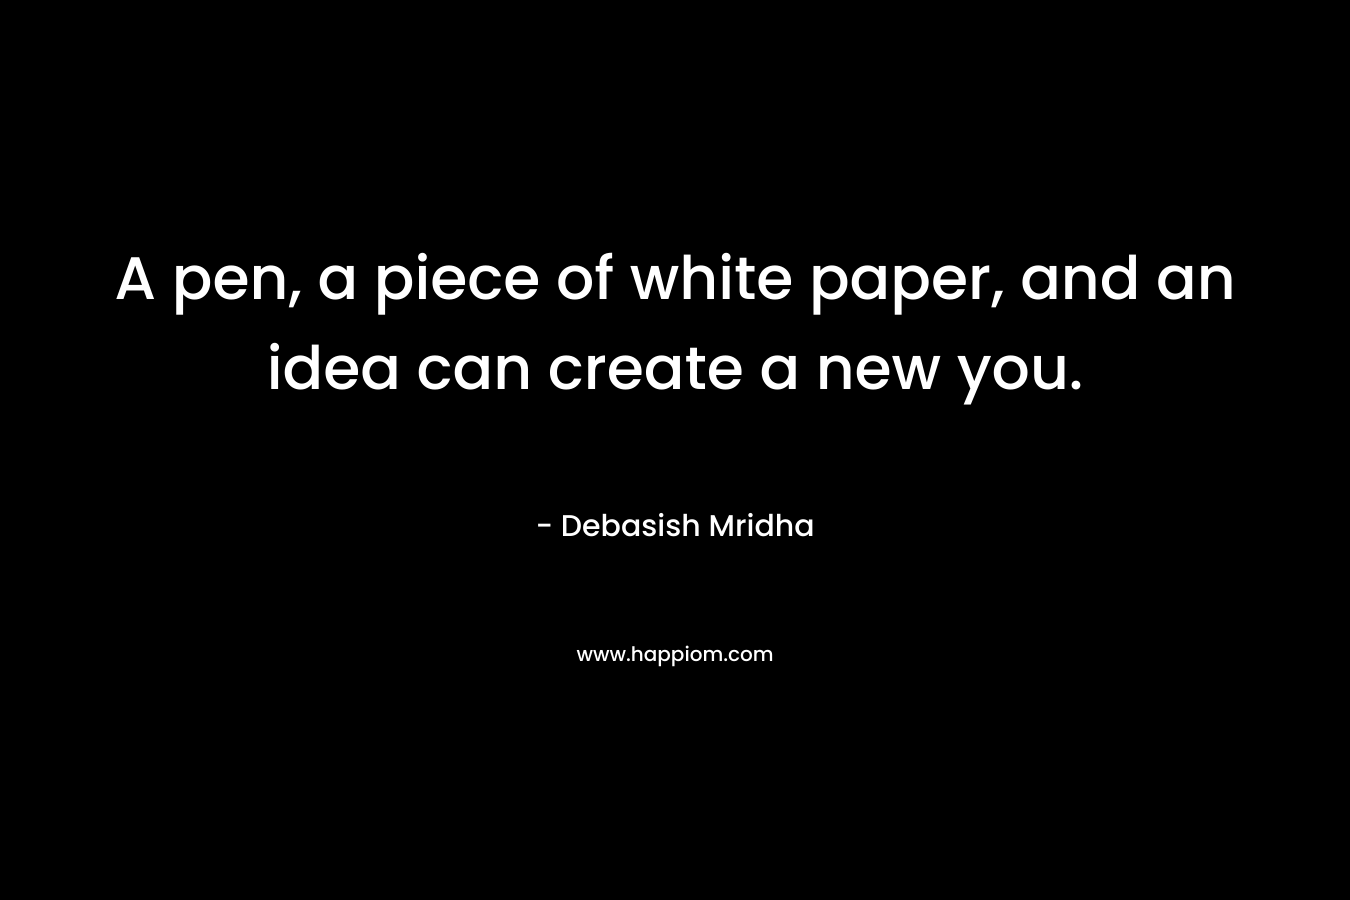 A pen, a piece of white paper, and an idea can create a new you.